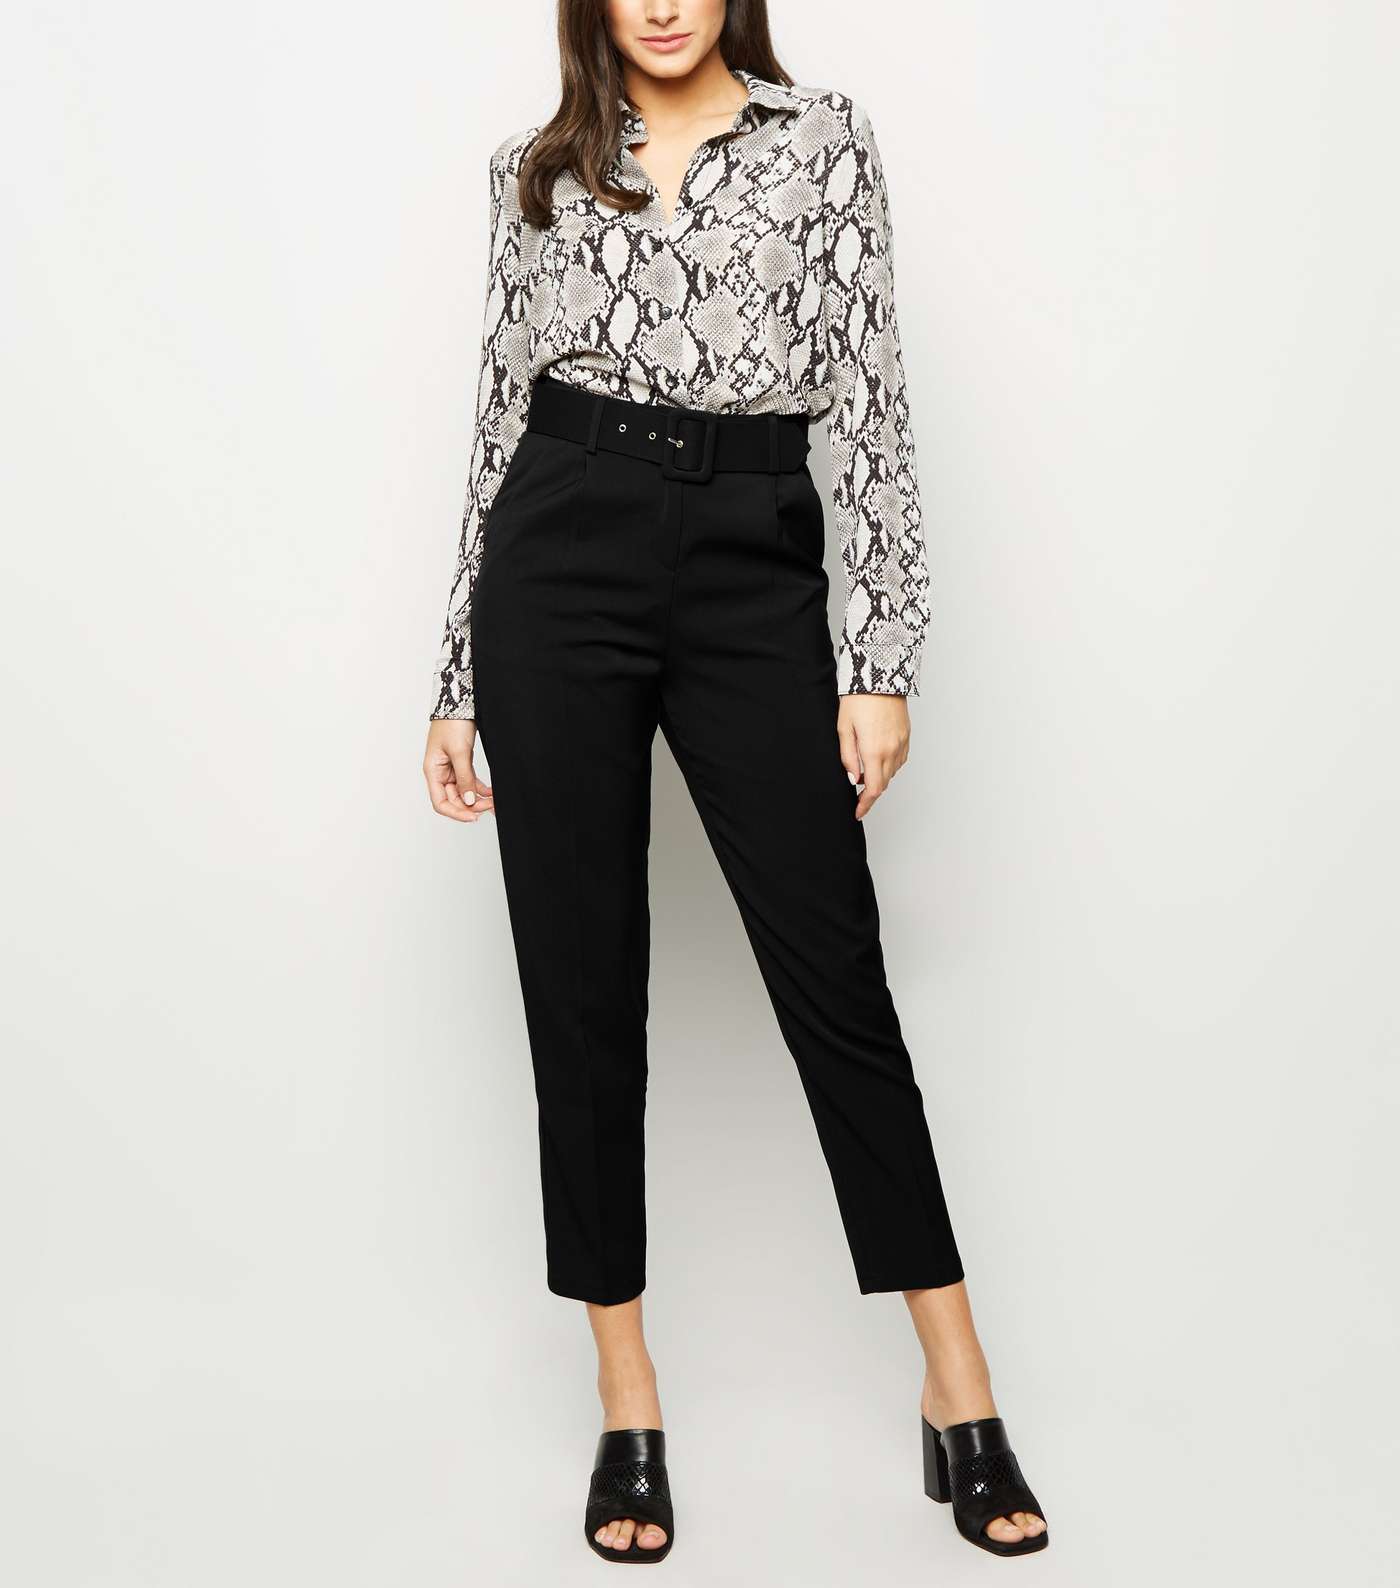 Cameo Black Belted Slim Leg Trousers